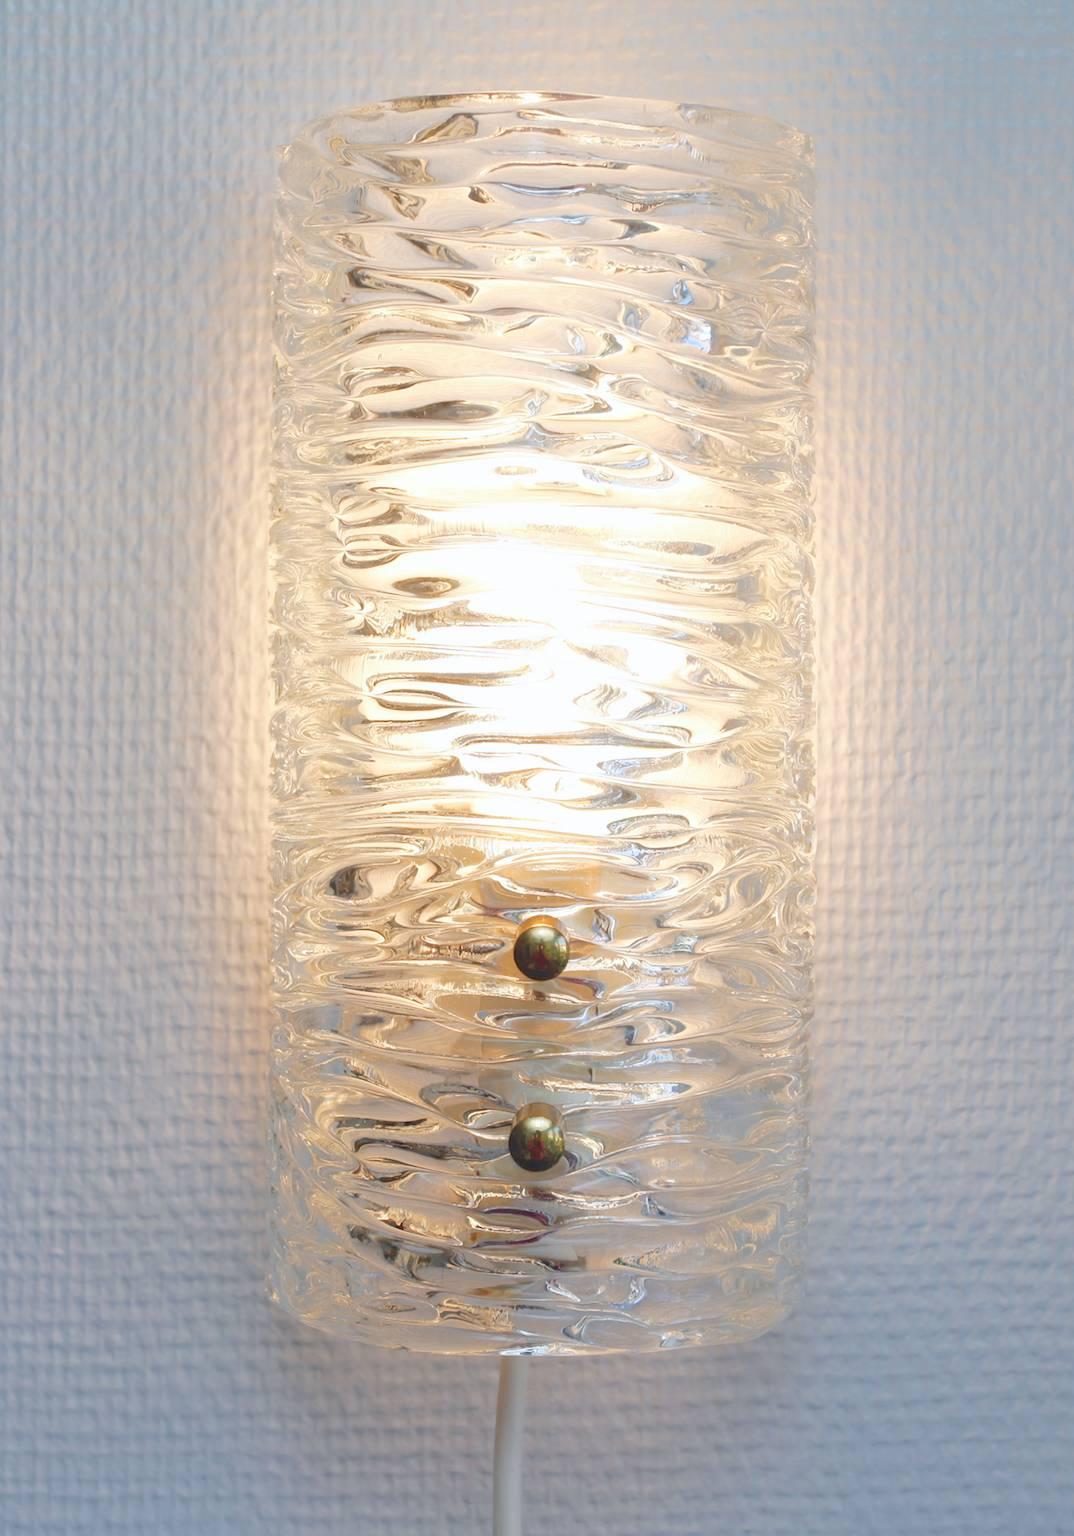 A single Orrefors Scandinavian Modern textured ice glass sconce by Gunnar Fagerlund, Sweden 1960´s. Mounted with brass fittings on a metal plate.
This piece works very well in pairs as a single item.

Designed by Carl Fagerlund (1915-2011) for